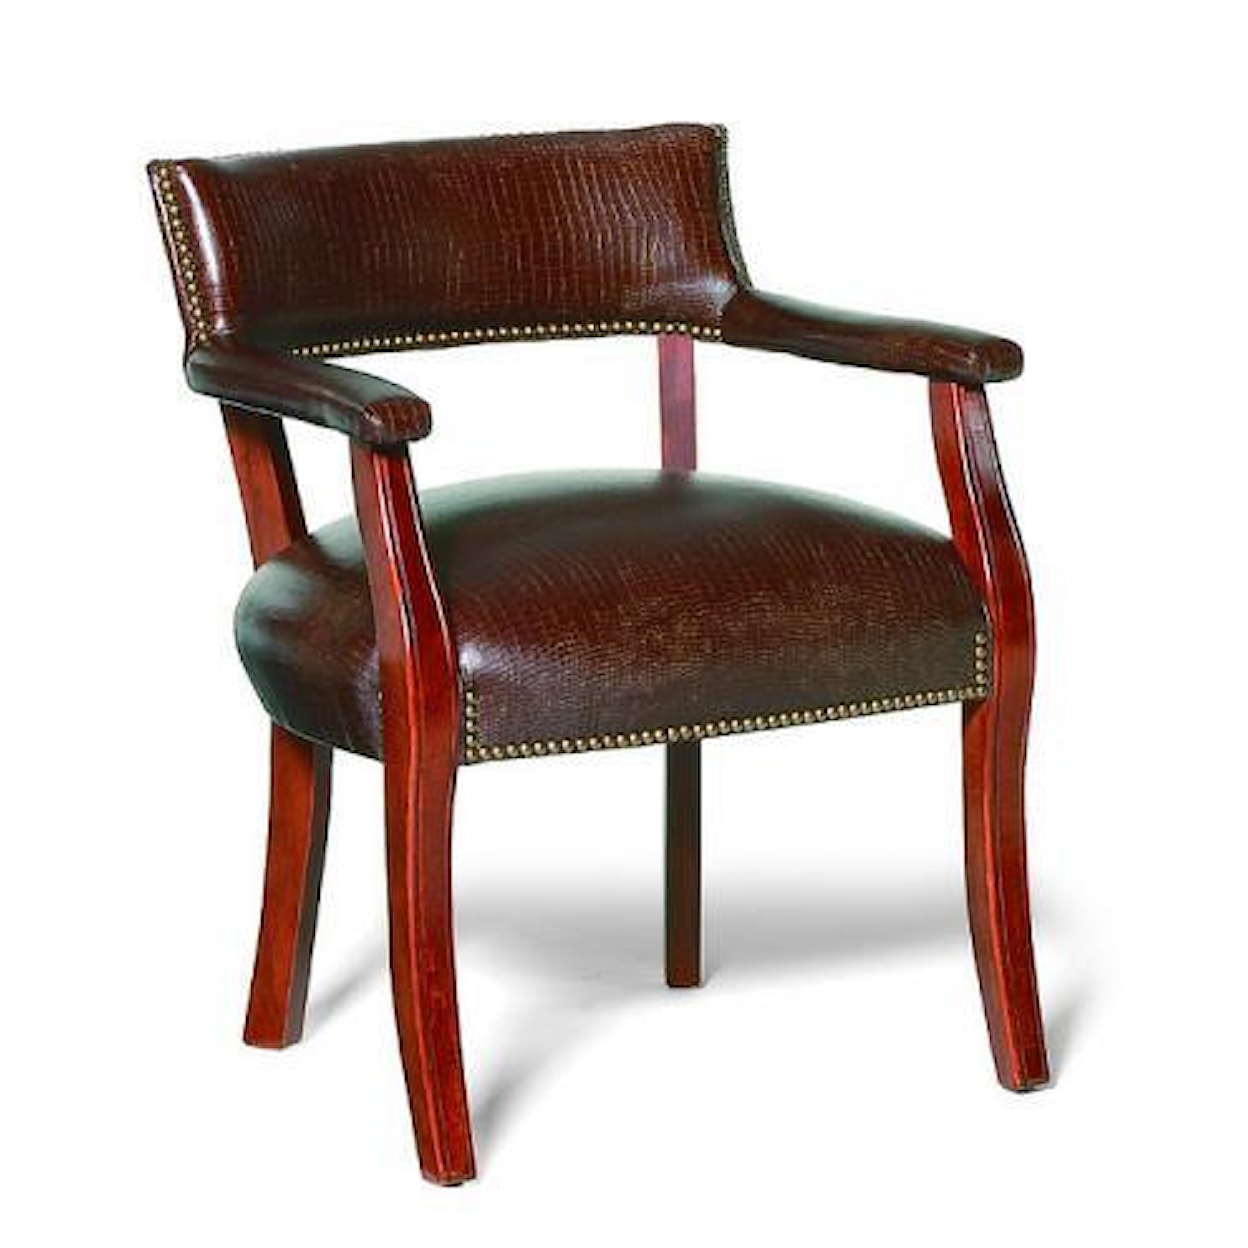 Fairfield Chairs Exposed Wood Occasional Chair